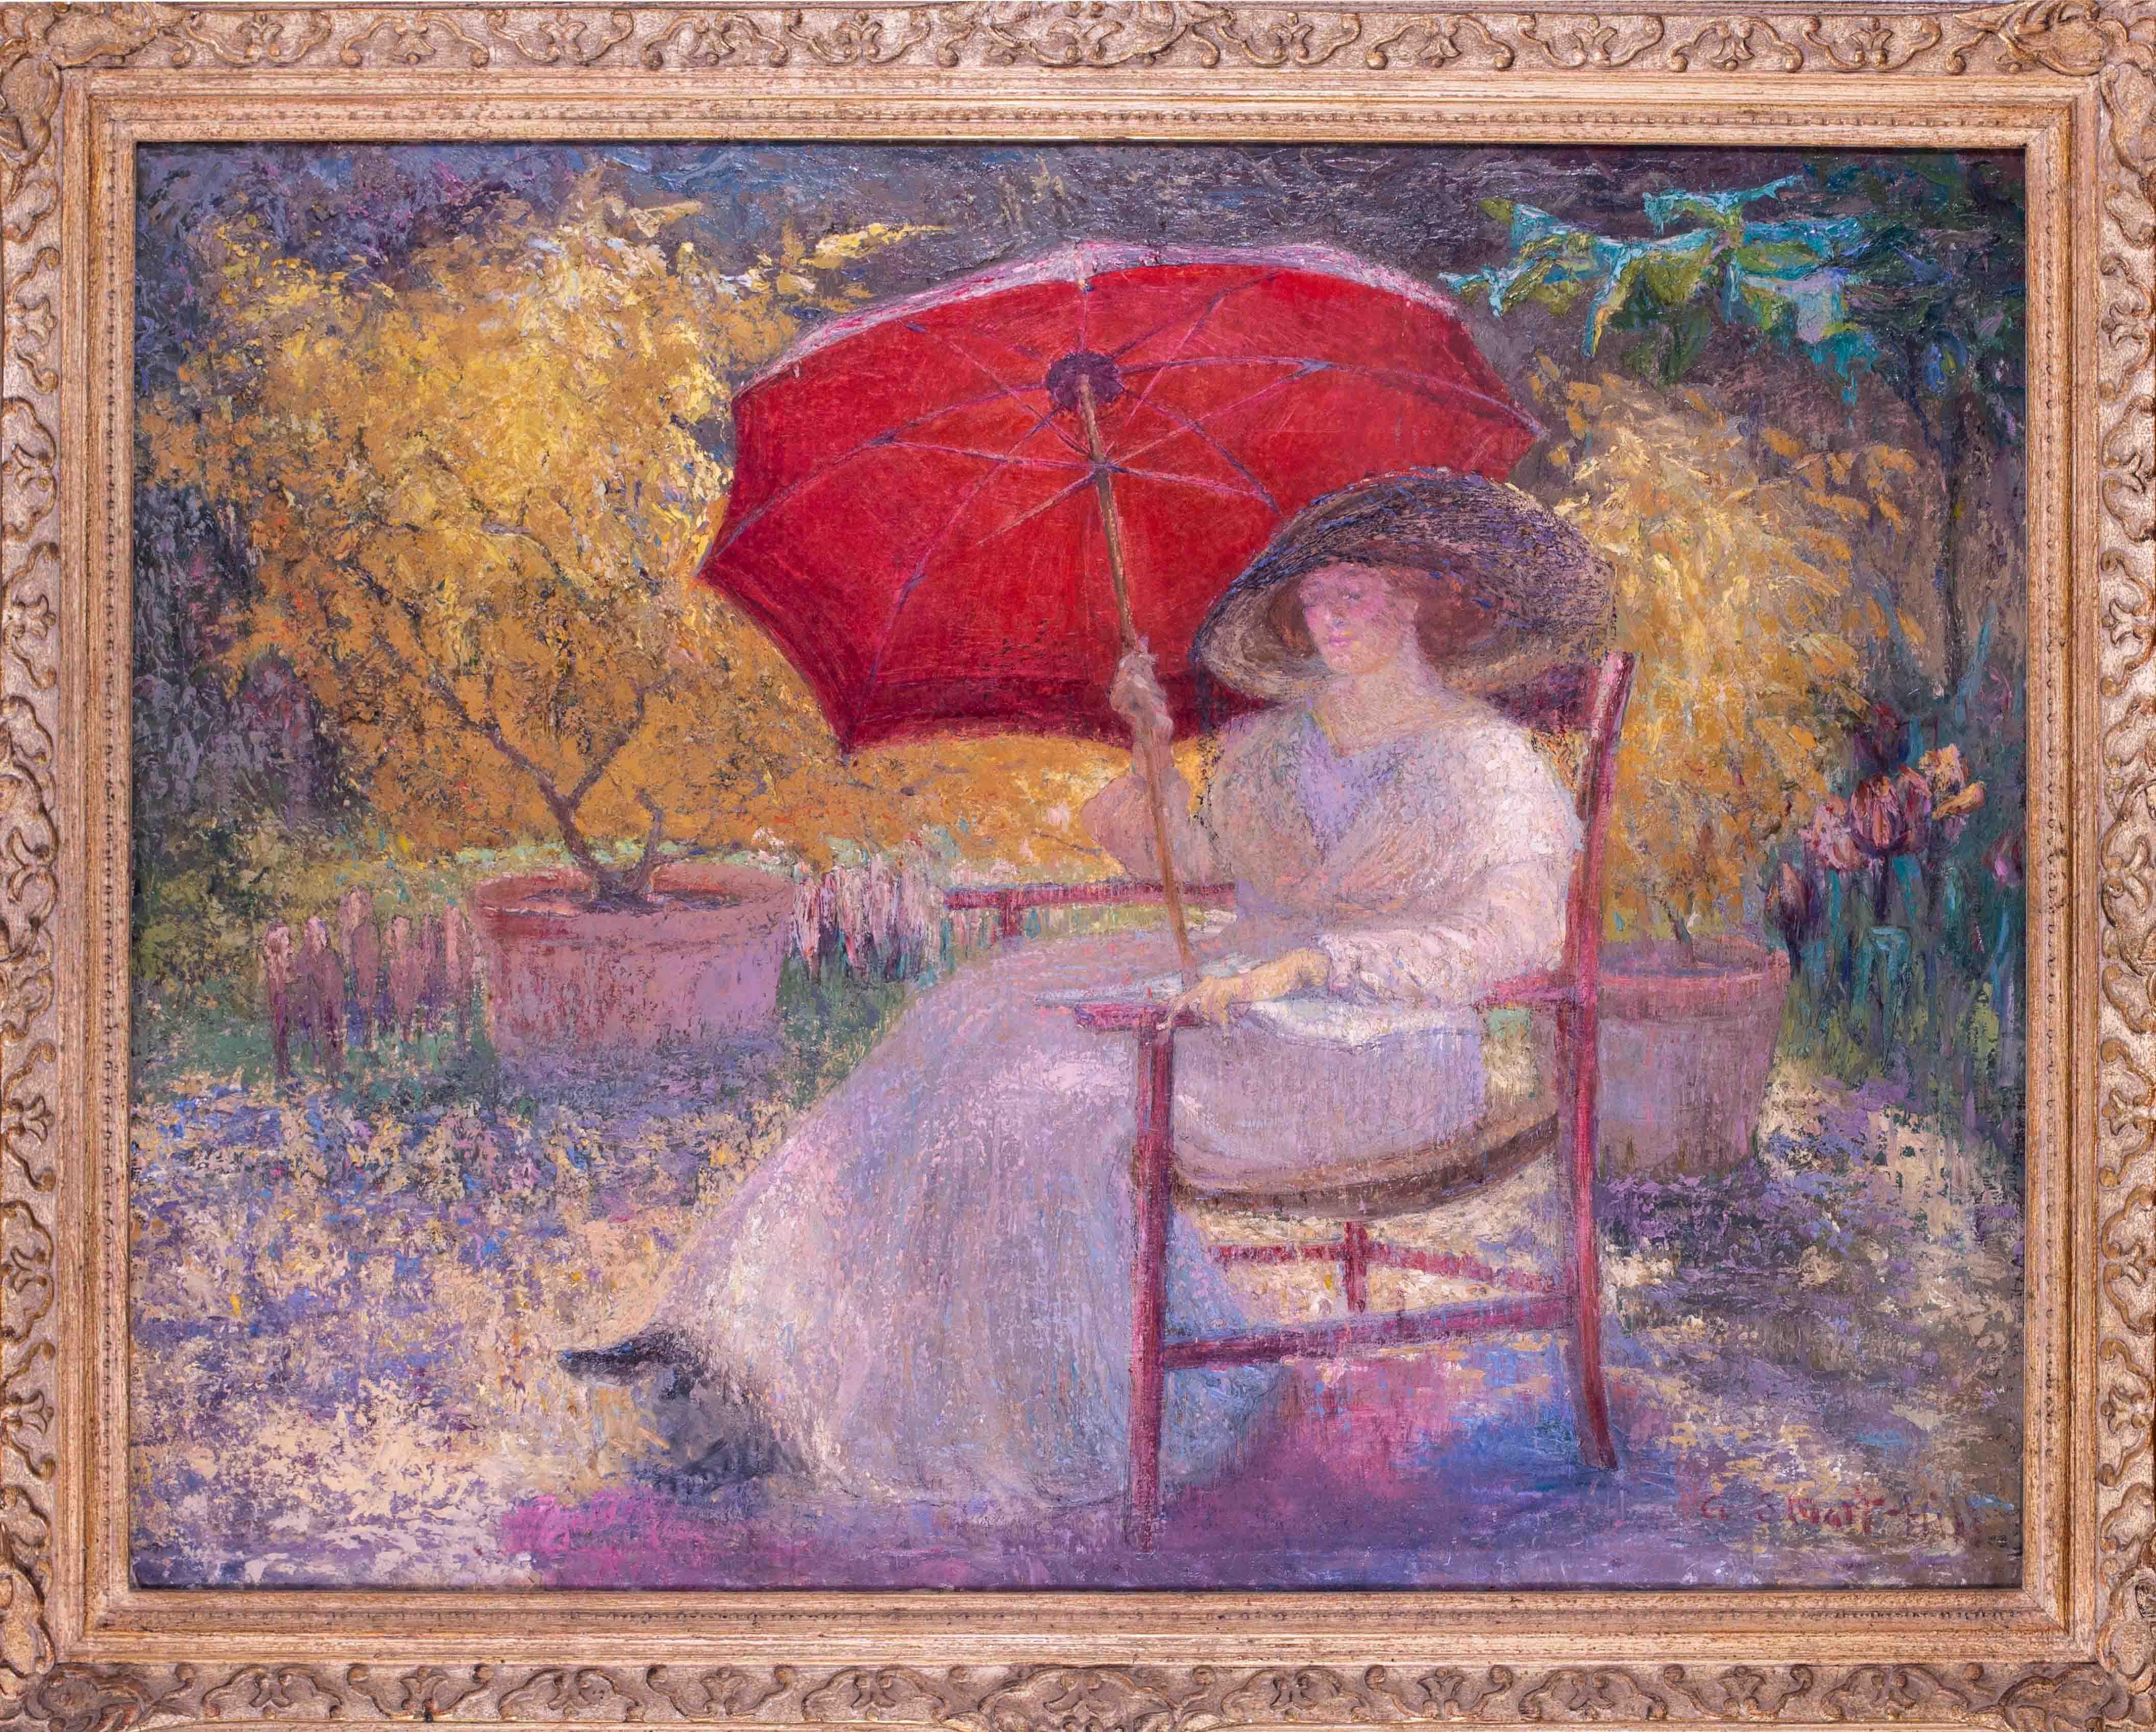 Alexander Stuart-Hill Figurative Painting - Scottish, 20th C Impressionist painting of lady with red parasol, summertime